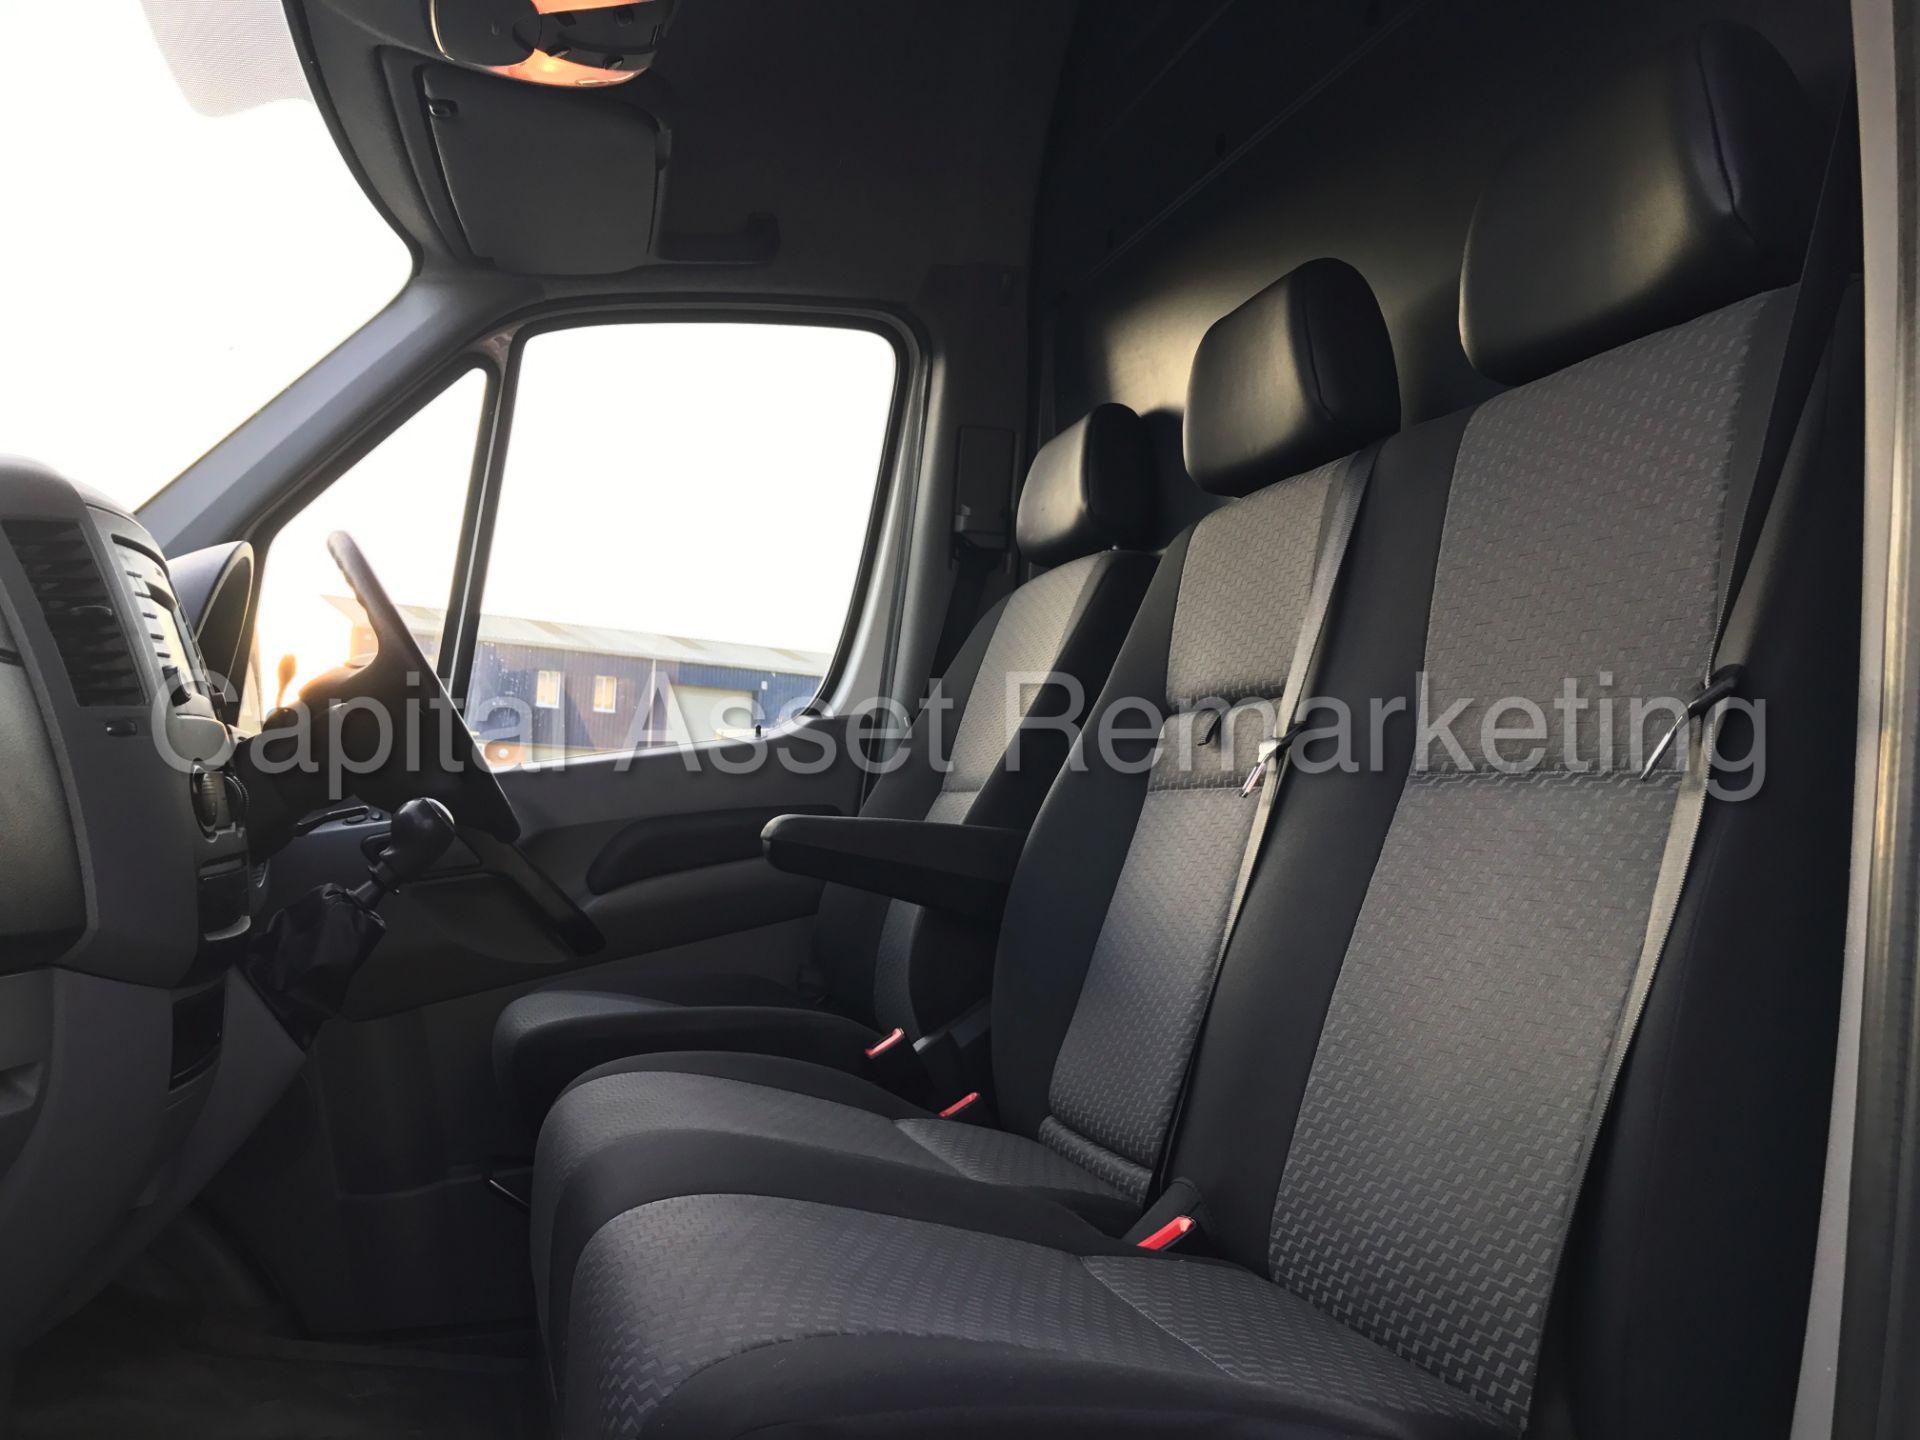 VOLKSWAGEN CRAFTER CR35 'LWB HI-ROOF' (2015 MODEL) '2.0 TDI - 163 PS - 6 SPEED' (1 COMPANY OWNER) - Image 19 of 23